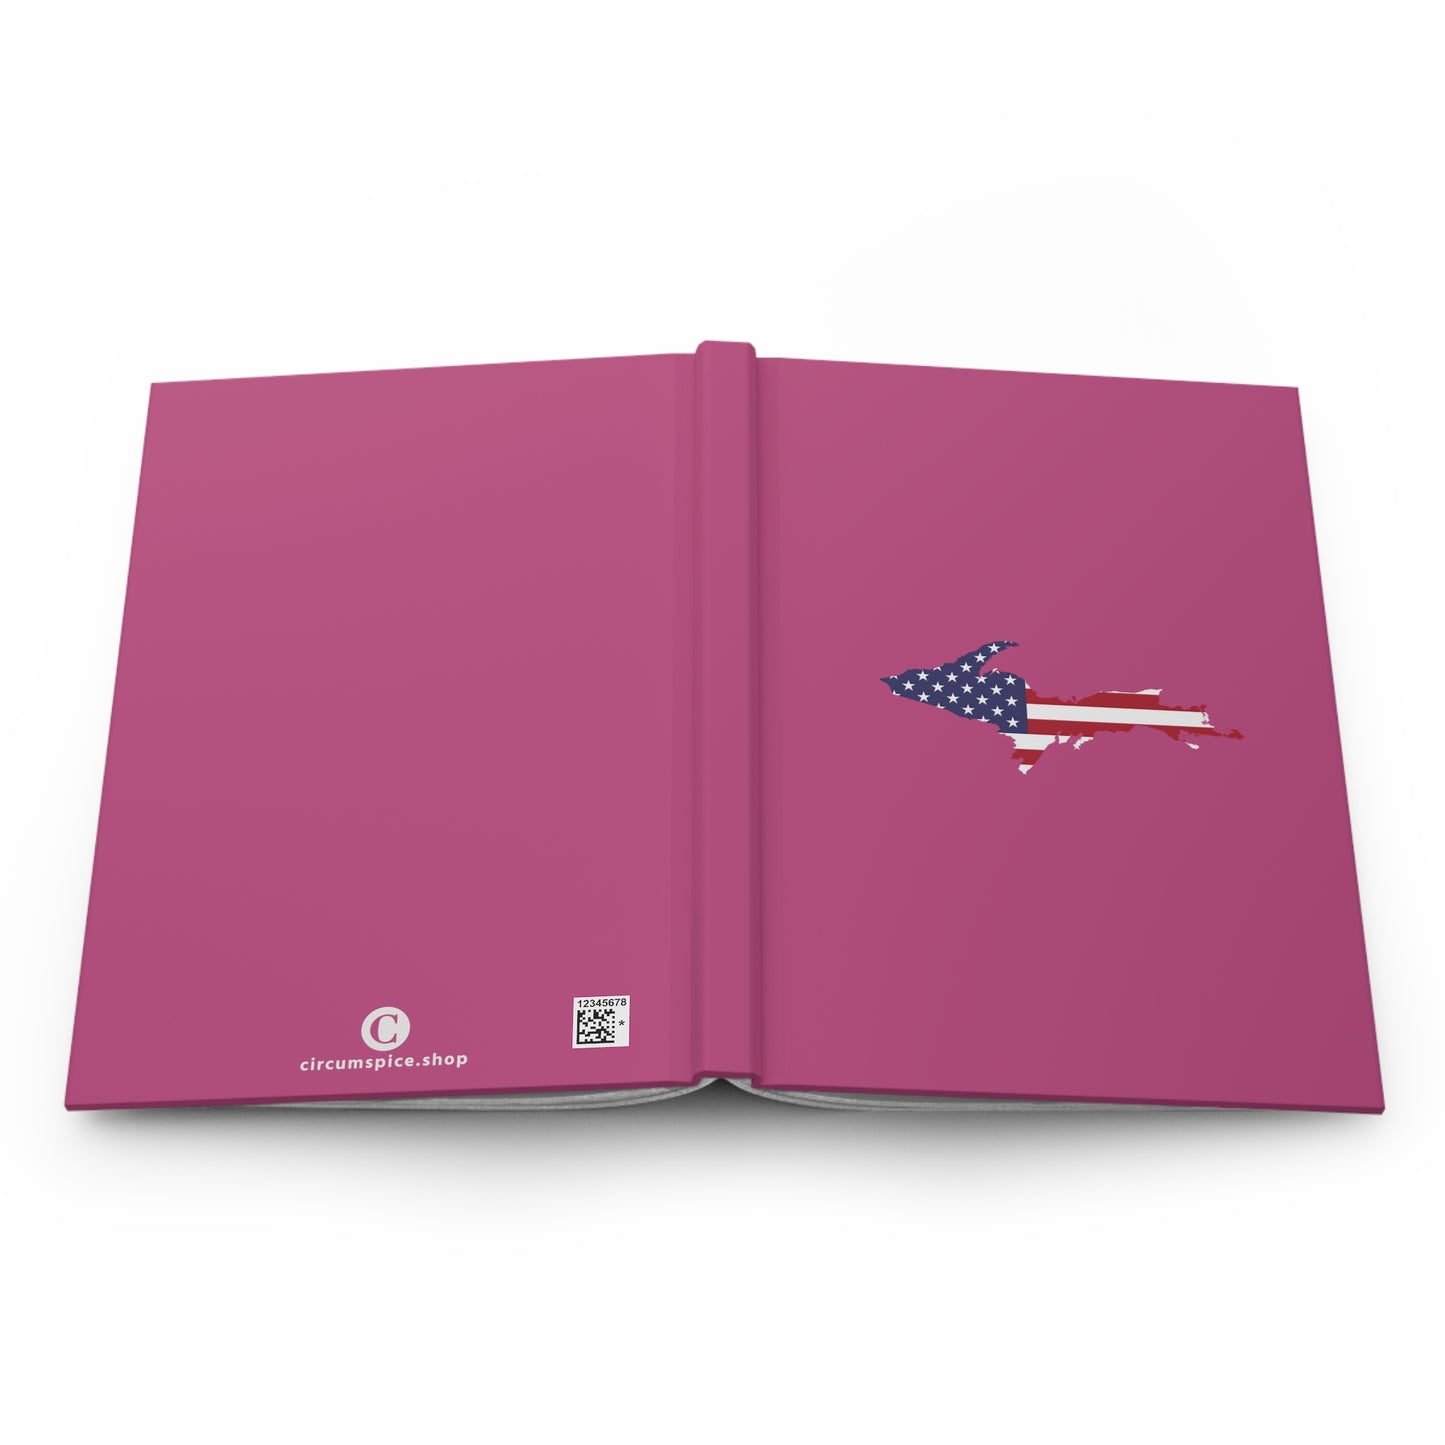 Michigan Upper Peninsula Hardcover Journal (w/ UP USA Flag) | Ruled - Apple Blossom Pink